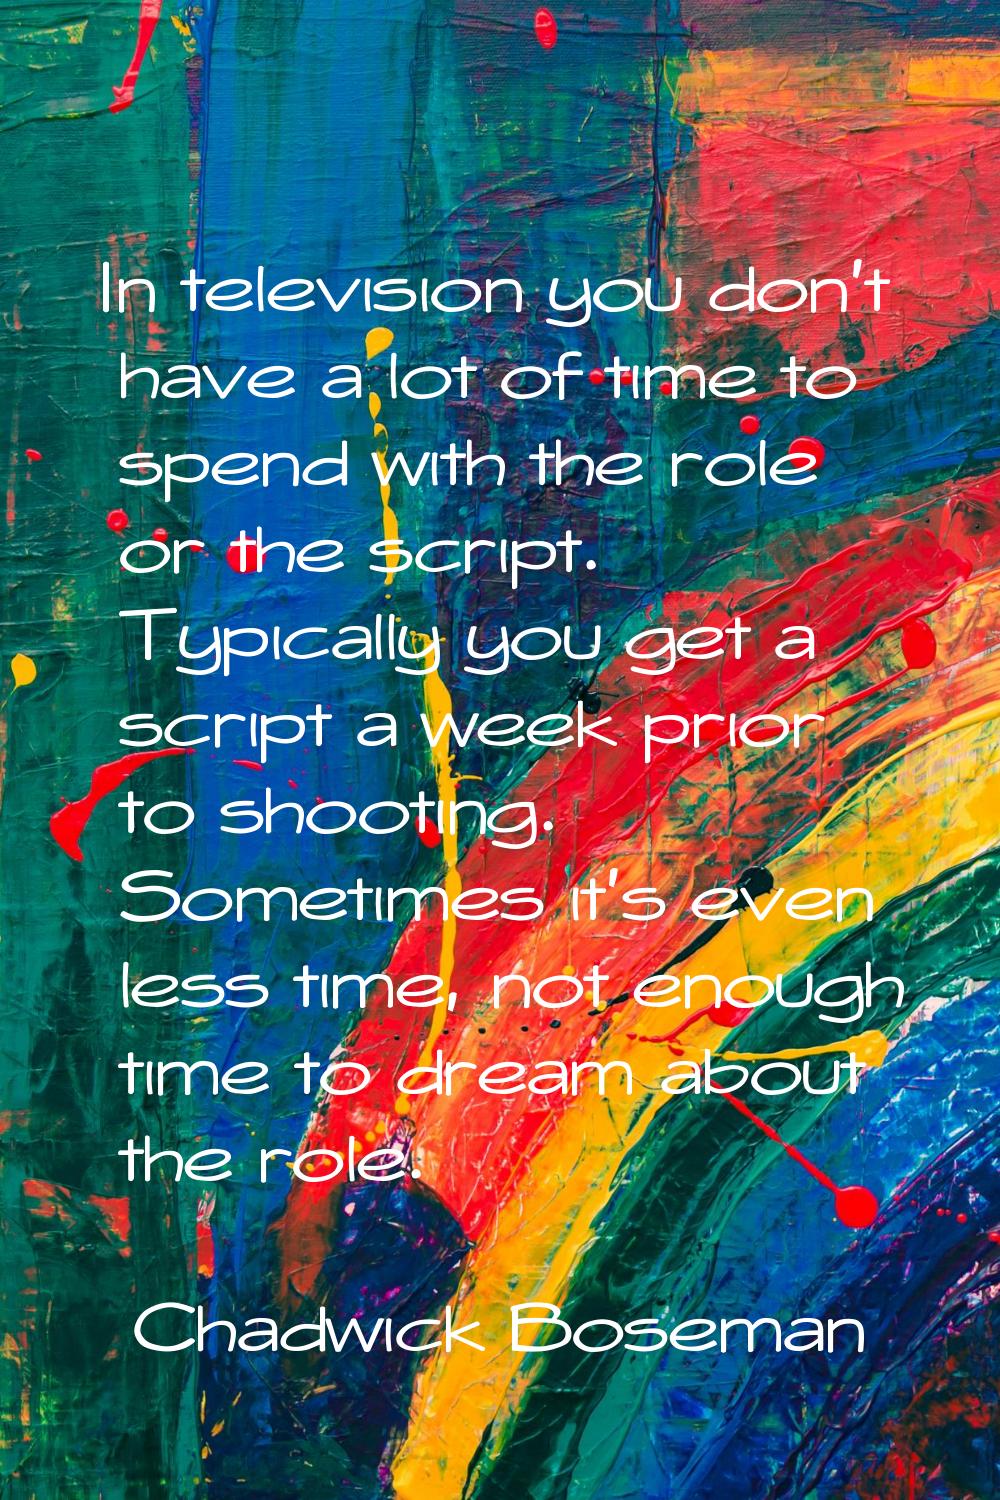 In television you don't have a lot of time to spend with the role or the script. Typically you get 